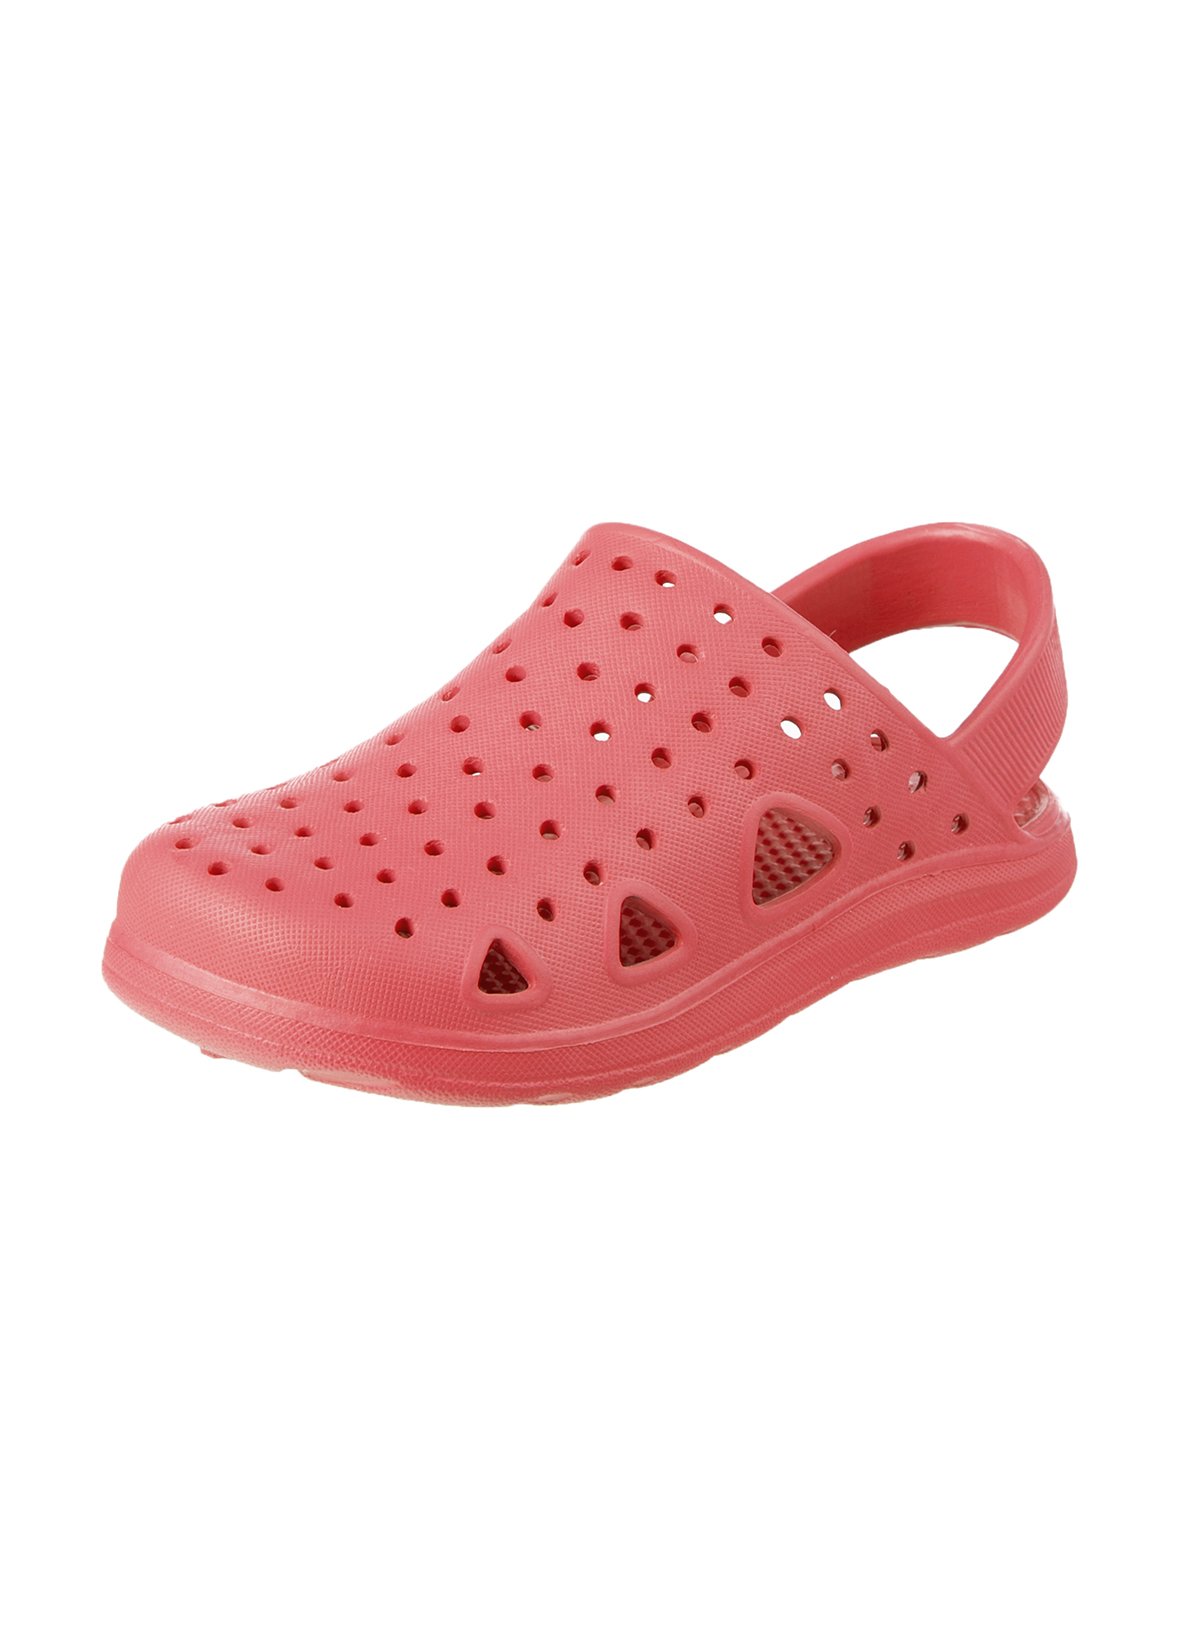 Sol Bounce Coral Clogs Review